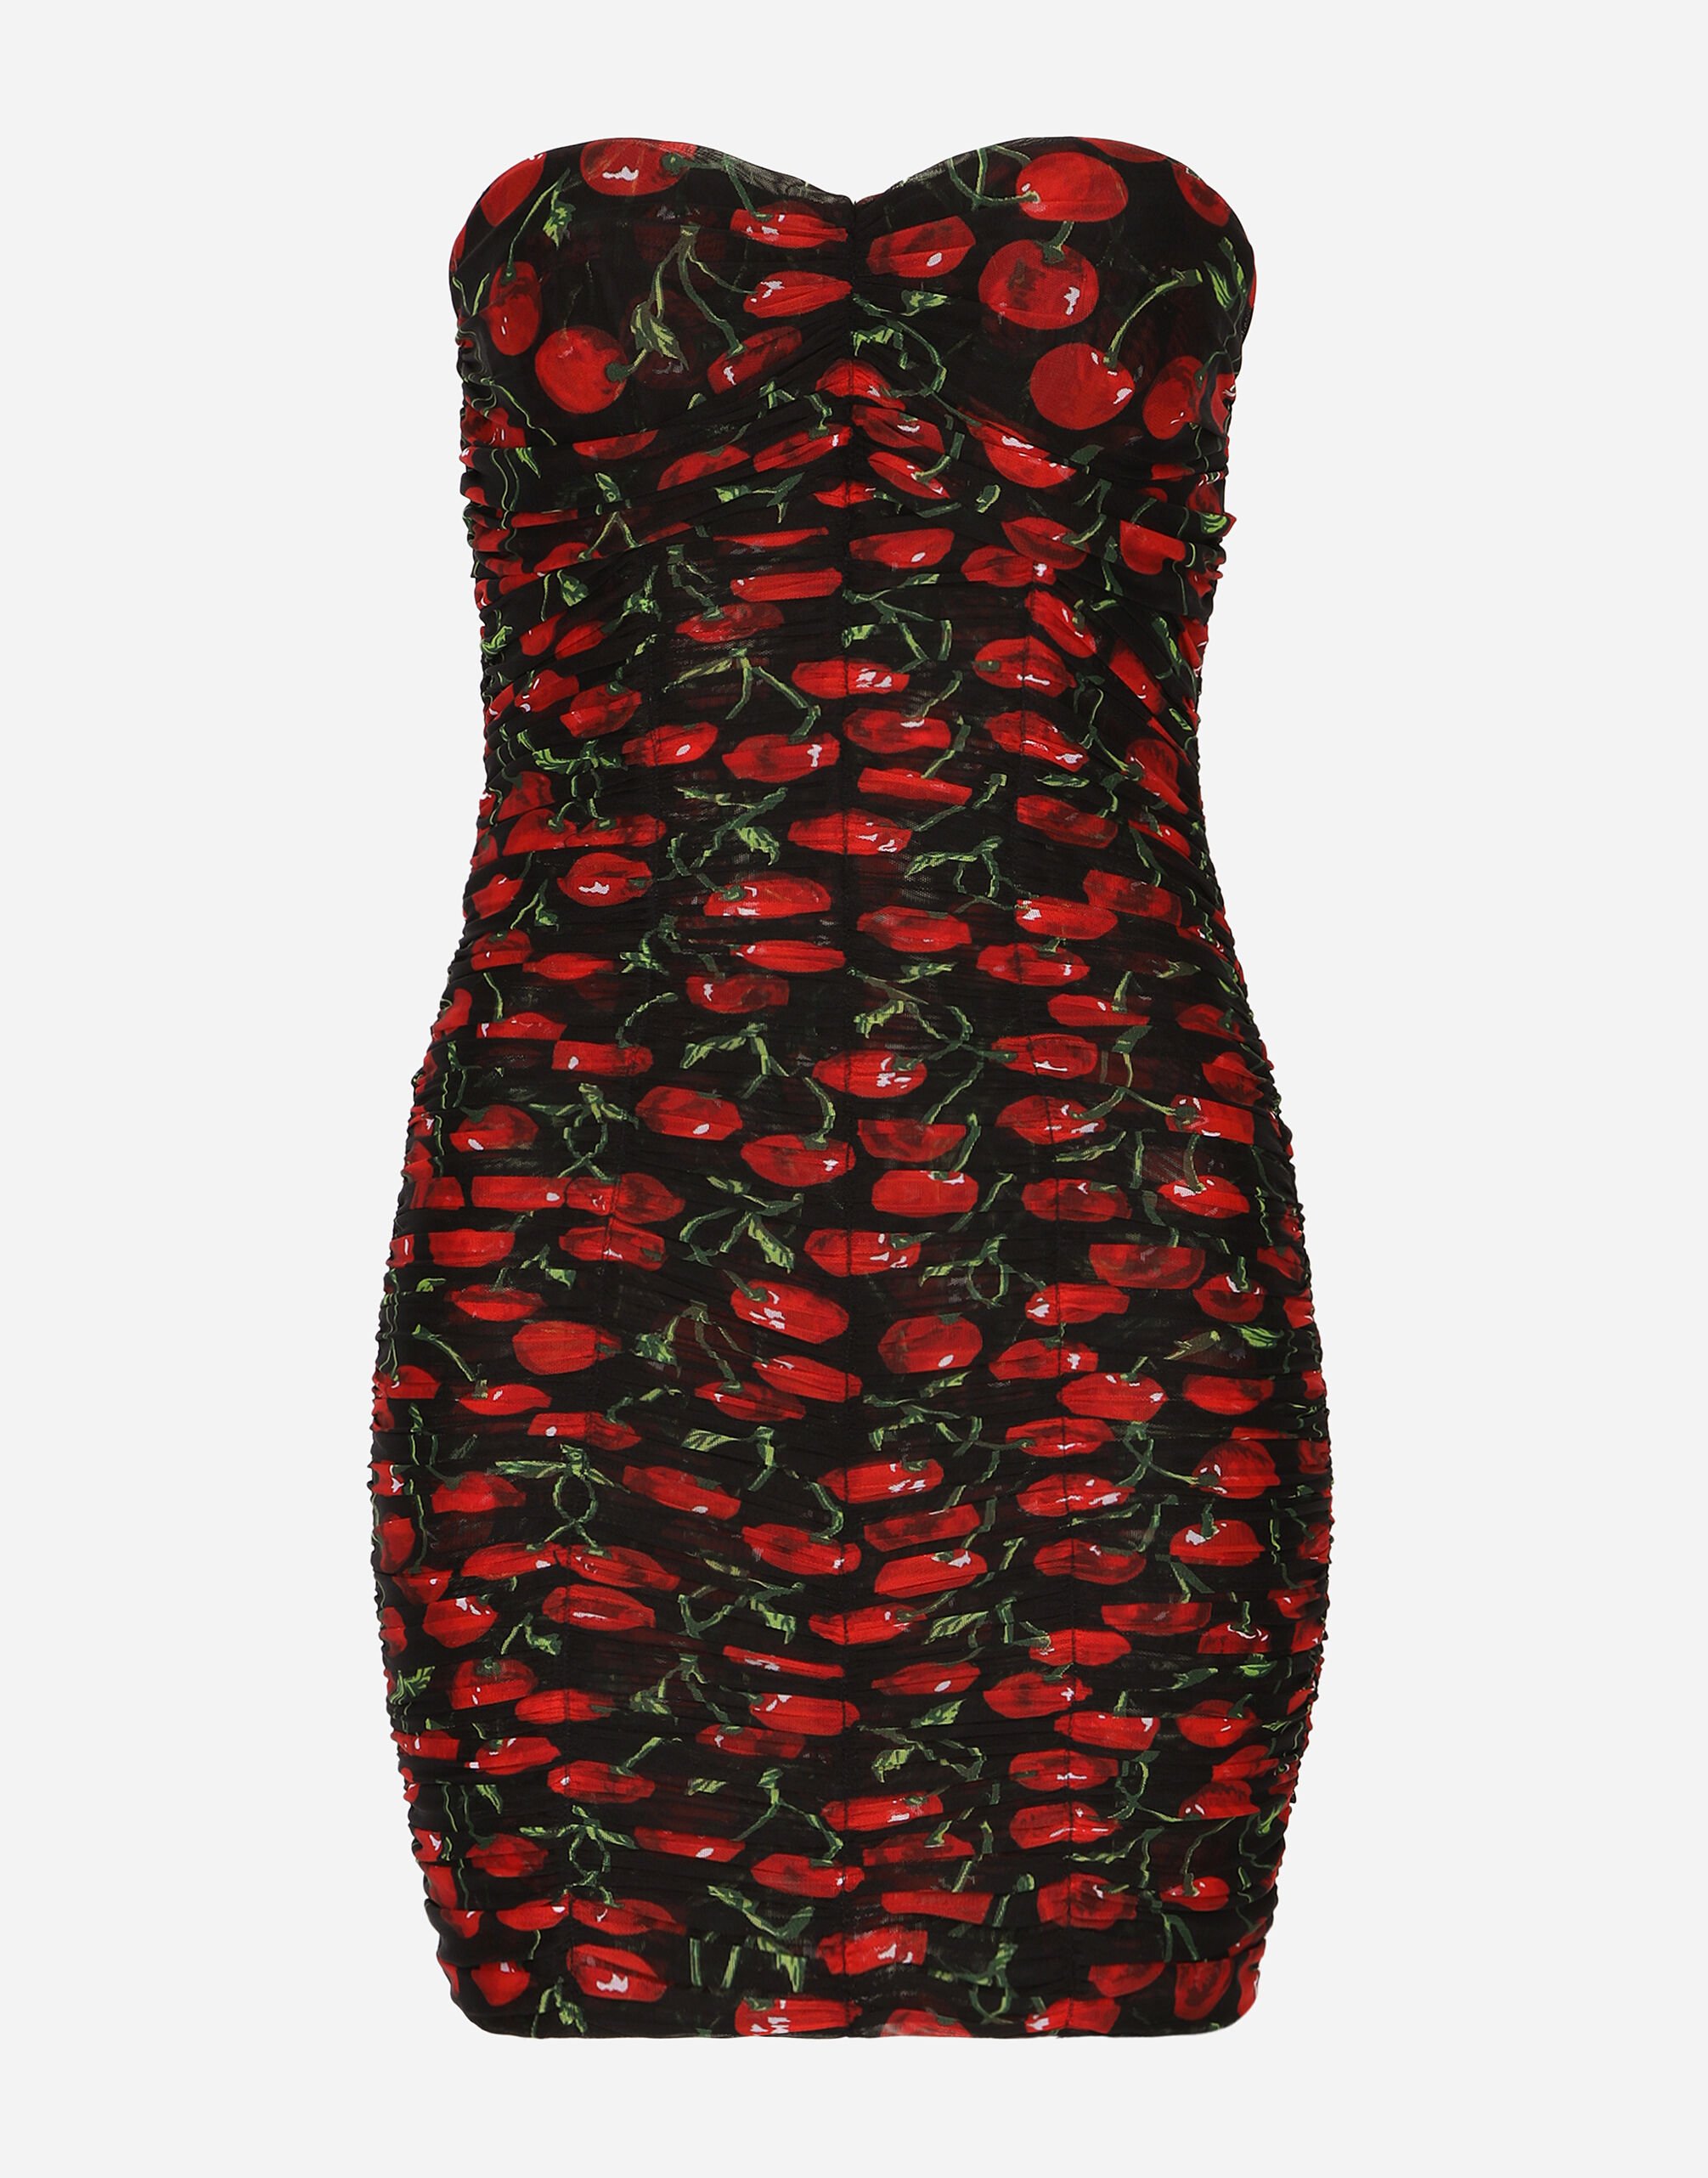 Dolce & Gabbana Cherry-print tulle strapless dress with draping Black F26R2TOUADW